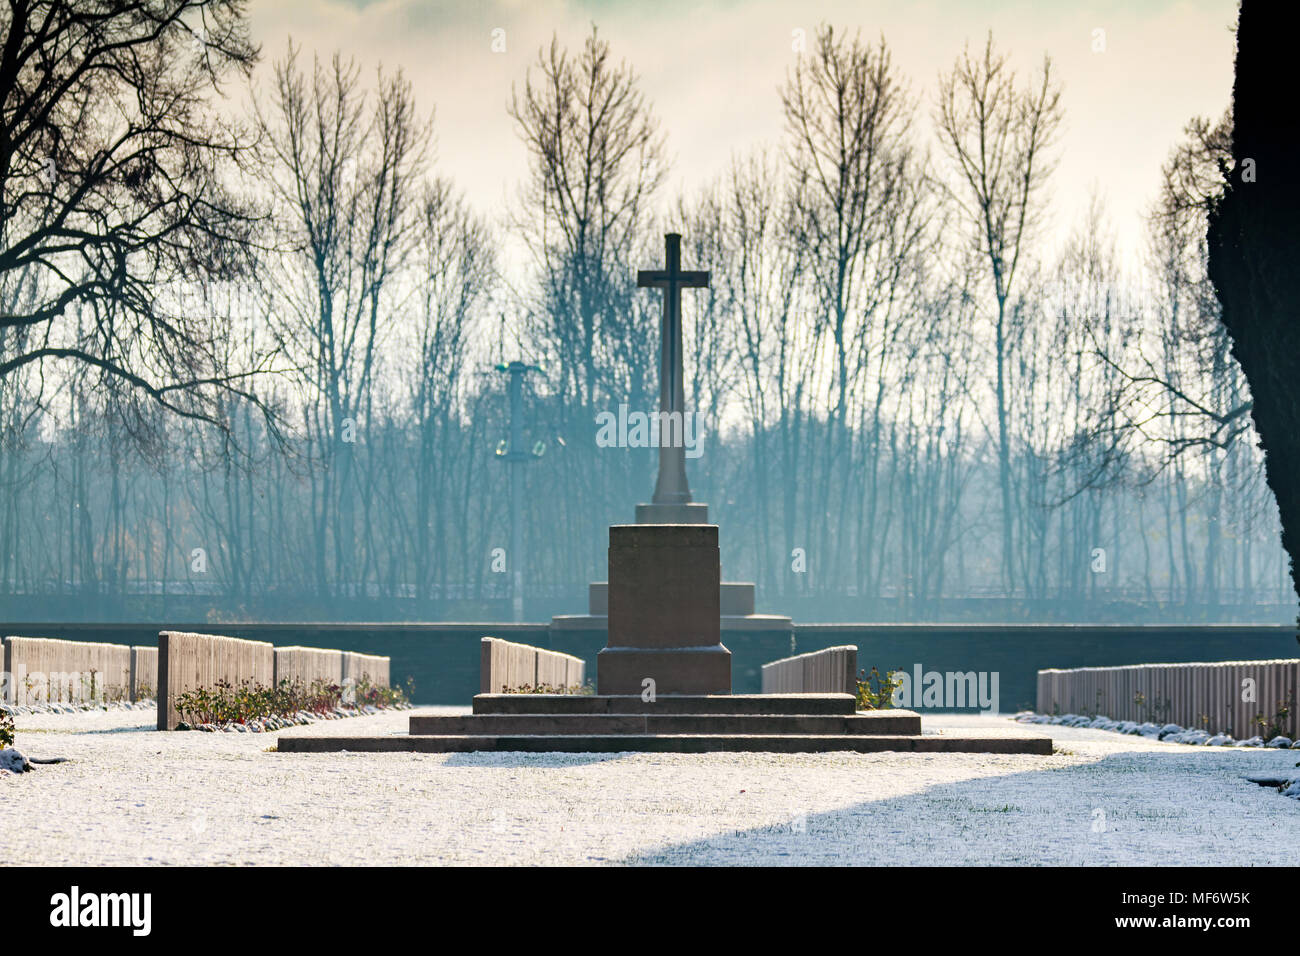 A misty morning at the snow covered Commonwealth War Graves Commissions (CWGC) Brown's Copse Cemetery. A Cenotaph behind a Stone of Remembrance. Stock Photo